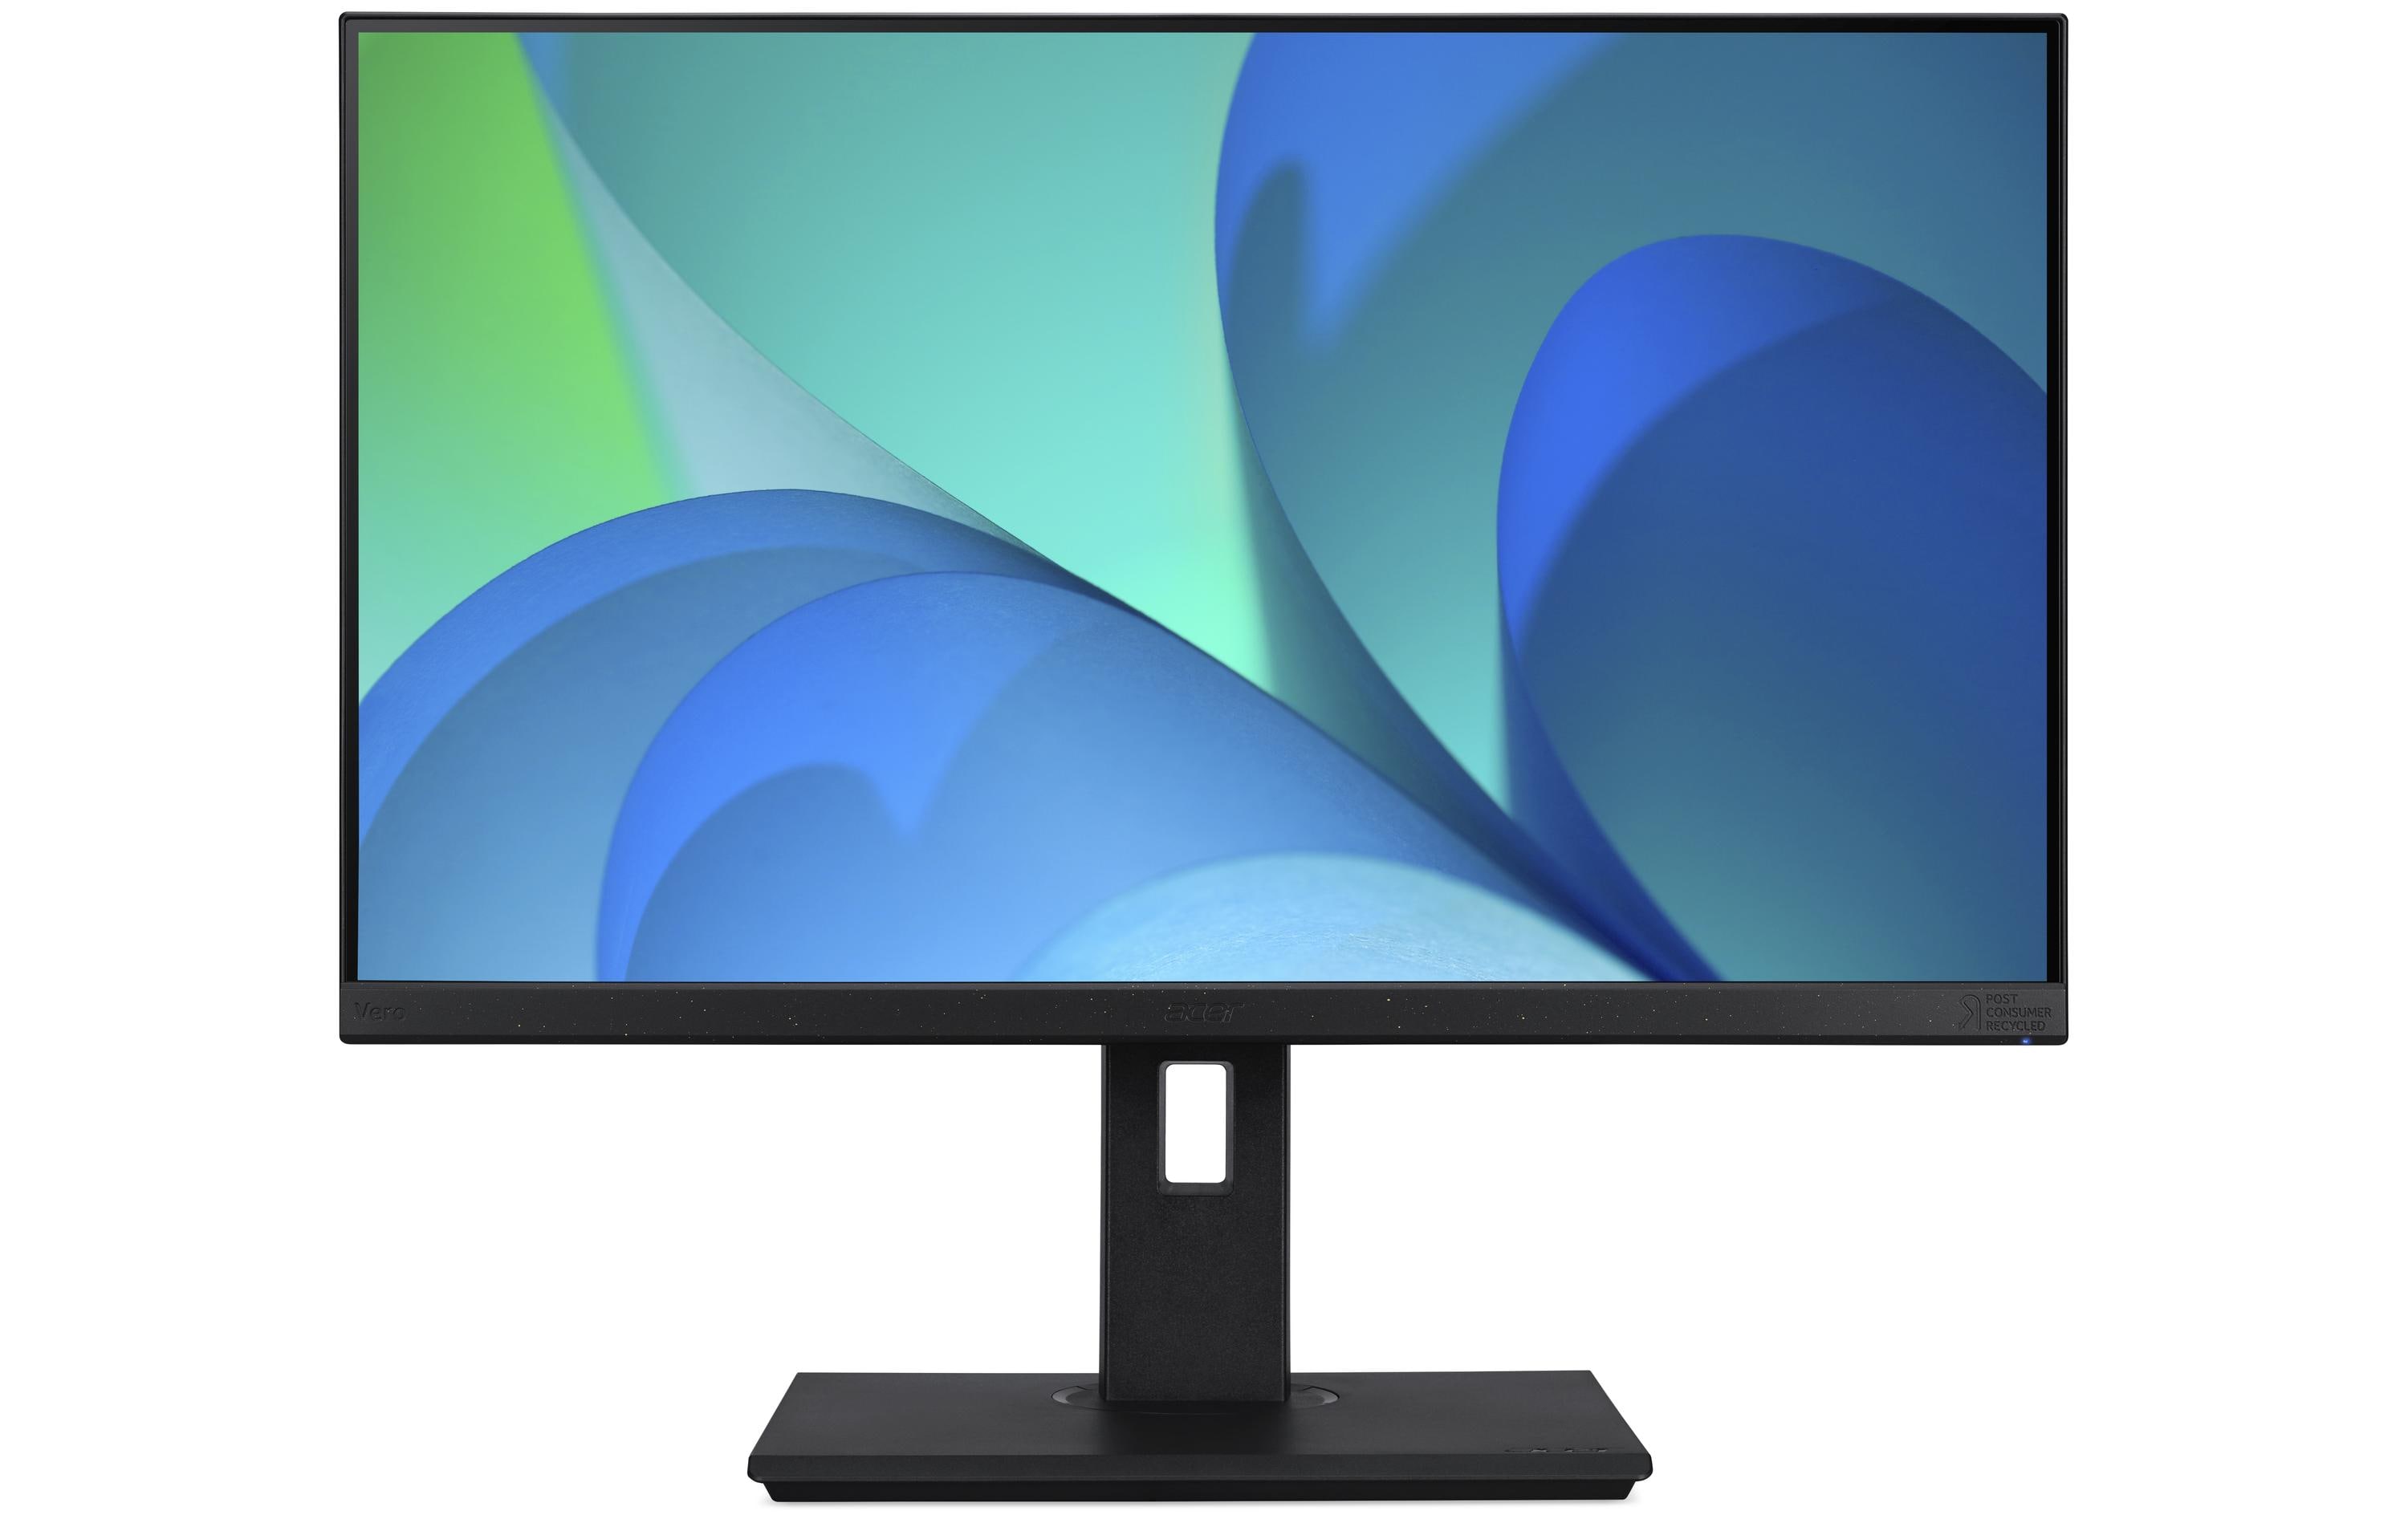 Acer LED-Monitor »Vero BR7 BR247Ybmiprx«, 60,21 cm/23,8 Zoll, 1920 x 1080 px, Full HD, 4 ms Reaktionszeit, 75 Hz